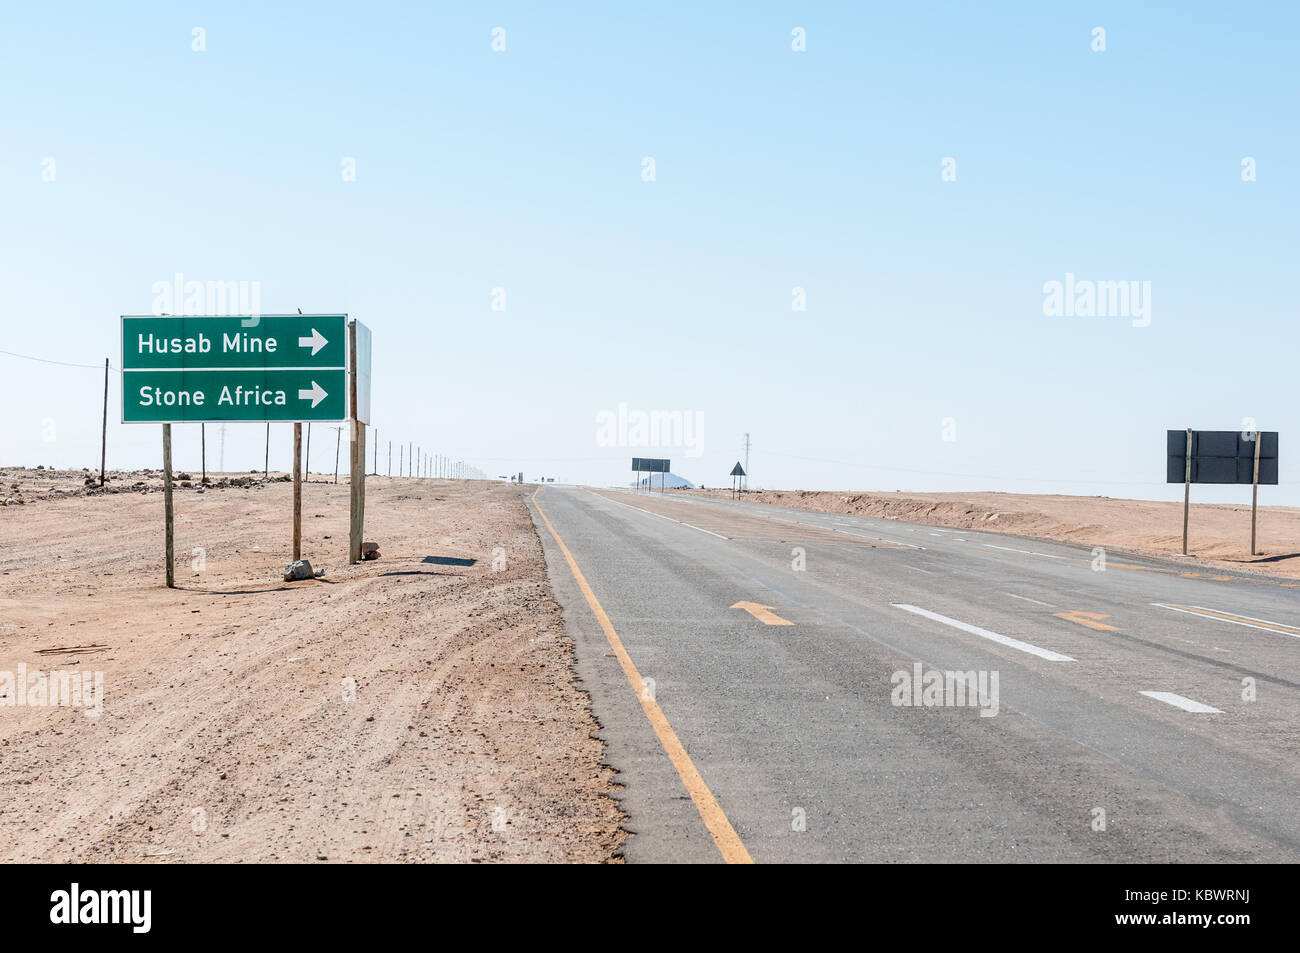 ARANDIS, NAMIBIA - JULY 3, 2017: The turn-off to the Husab Mine and Stone Africa from the B2-road between Swakopmund and Arandis in the Namib Desert o Stock Photo